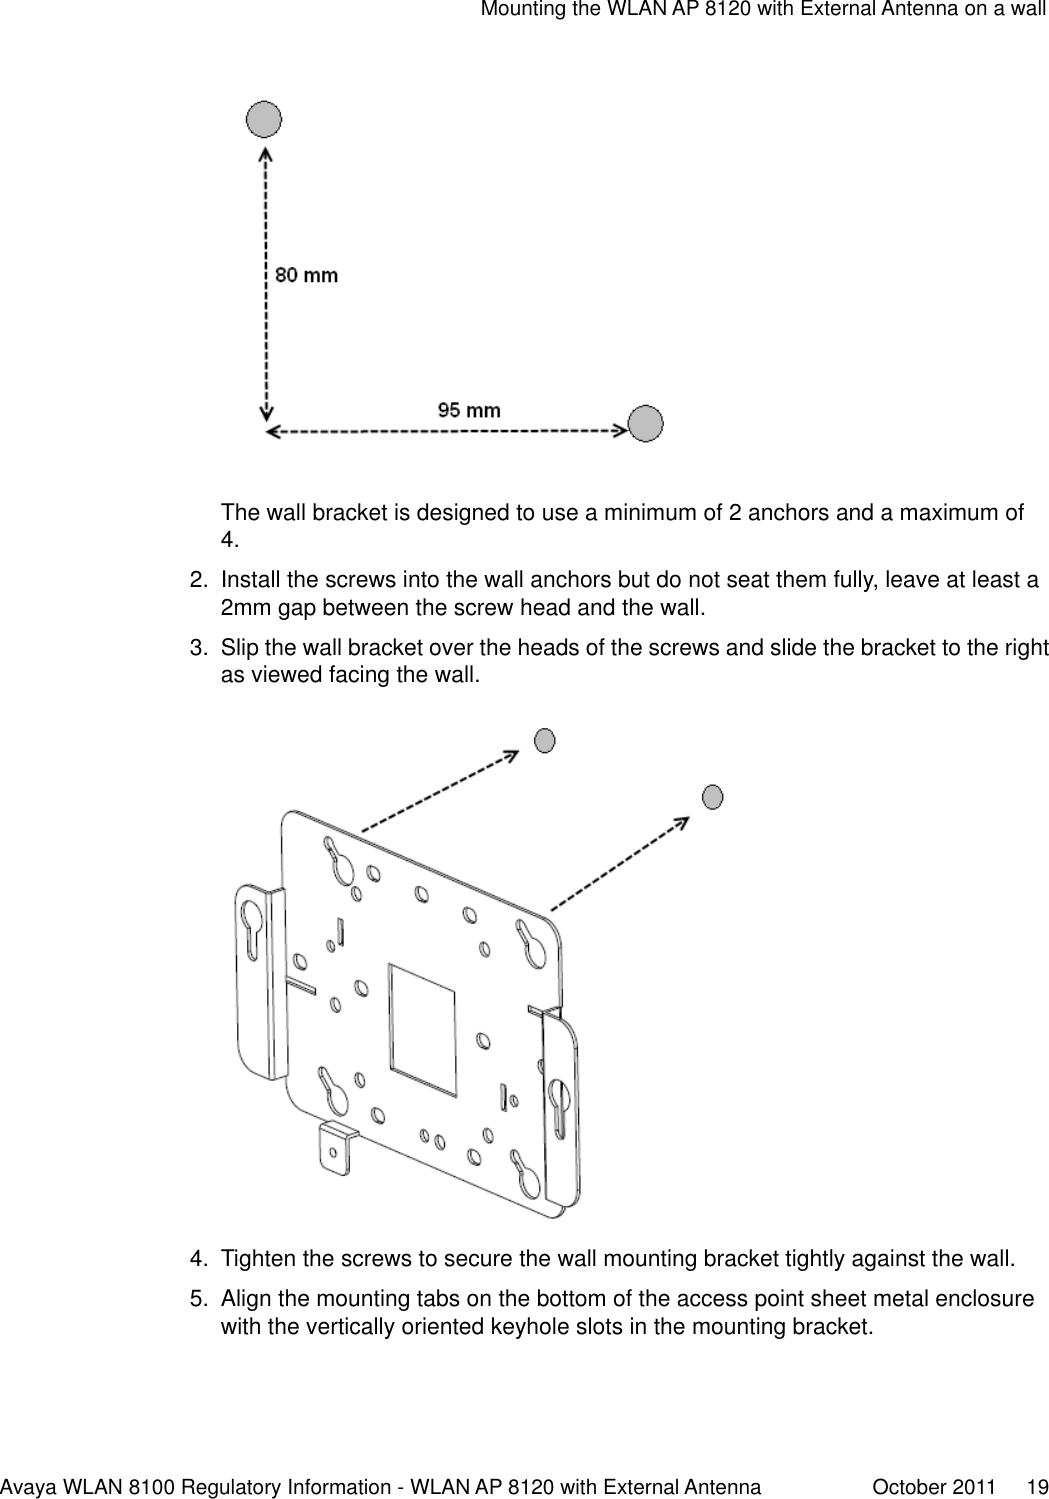 The wall bracket is designed to use a minimum of 2 anchors and a maximum of4.2. Install the screws into the wall anchors but do not seat them fully, leave at least a2mm gap between the screw head and the wall.3. Slip the wall bracket over the heads of the screws and slide the bracket to the rightas viewed facing the wall.4. Tighten the screws to secure the wall mounting bracket tightly against the wall.5. Align the mounting tabs on the bottom of the access point sheet metal enclosurewith the vertically oriented keyhole slots in the mounting bracket.Mounting the WLAN AP 8120 with External Antenna on a wallAvaya WLAN 8100 Regulatory Information - WLAN AP 8120 with External Antenna October 2011     19